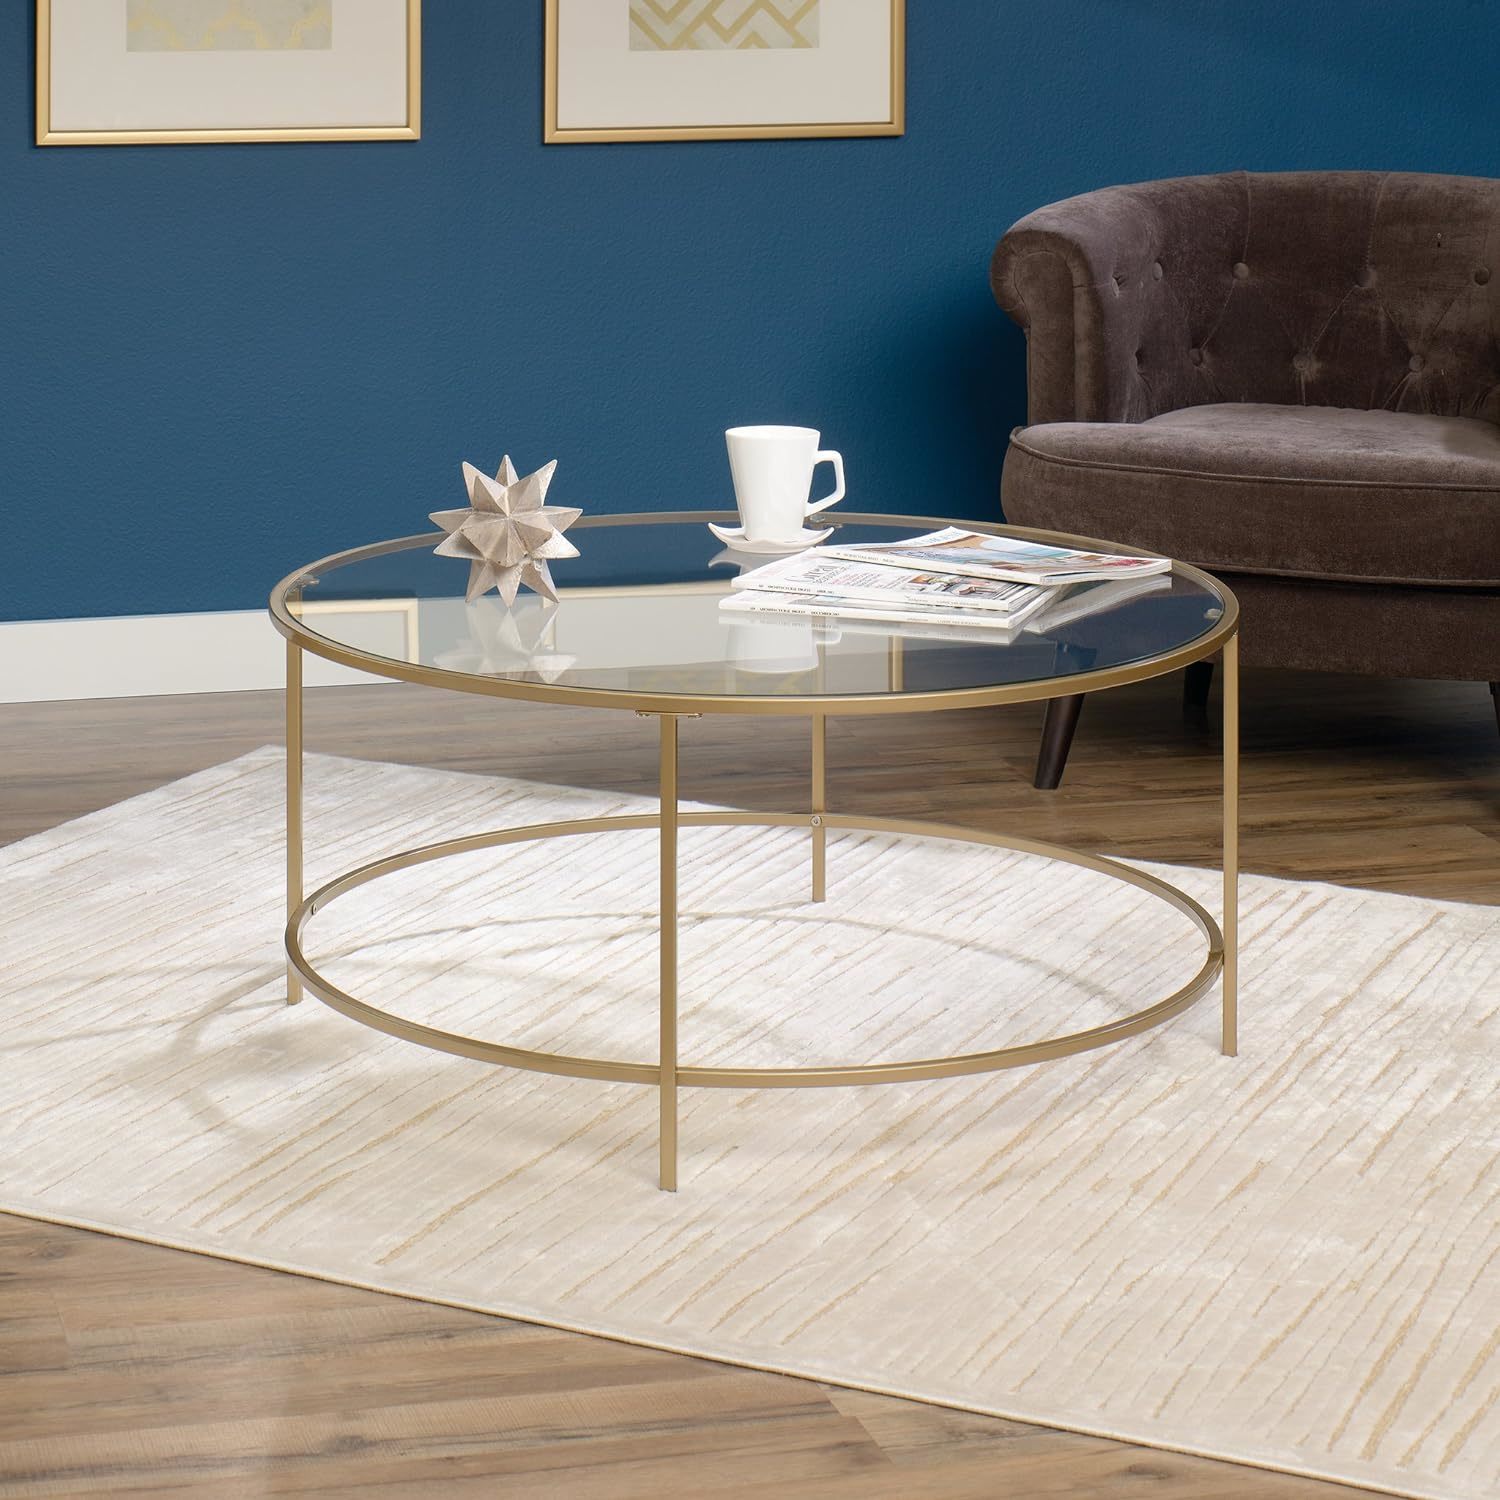 Primary image for Round Int Lux Coffee Table With Glass Top And Gold Finish, Sauder 417830.